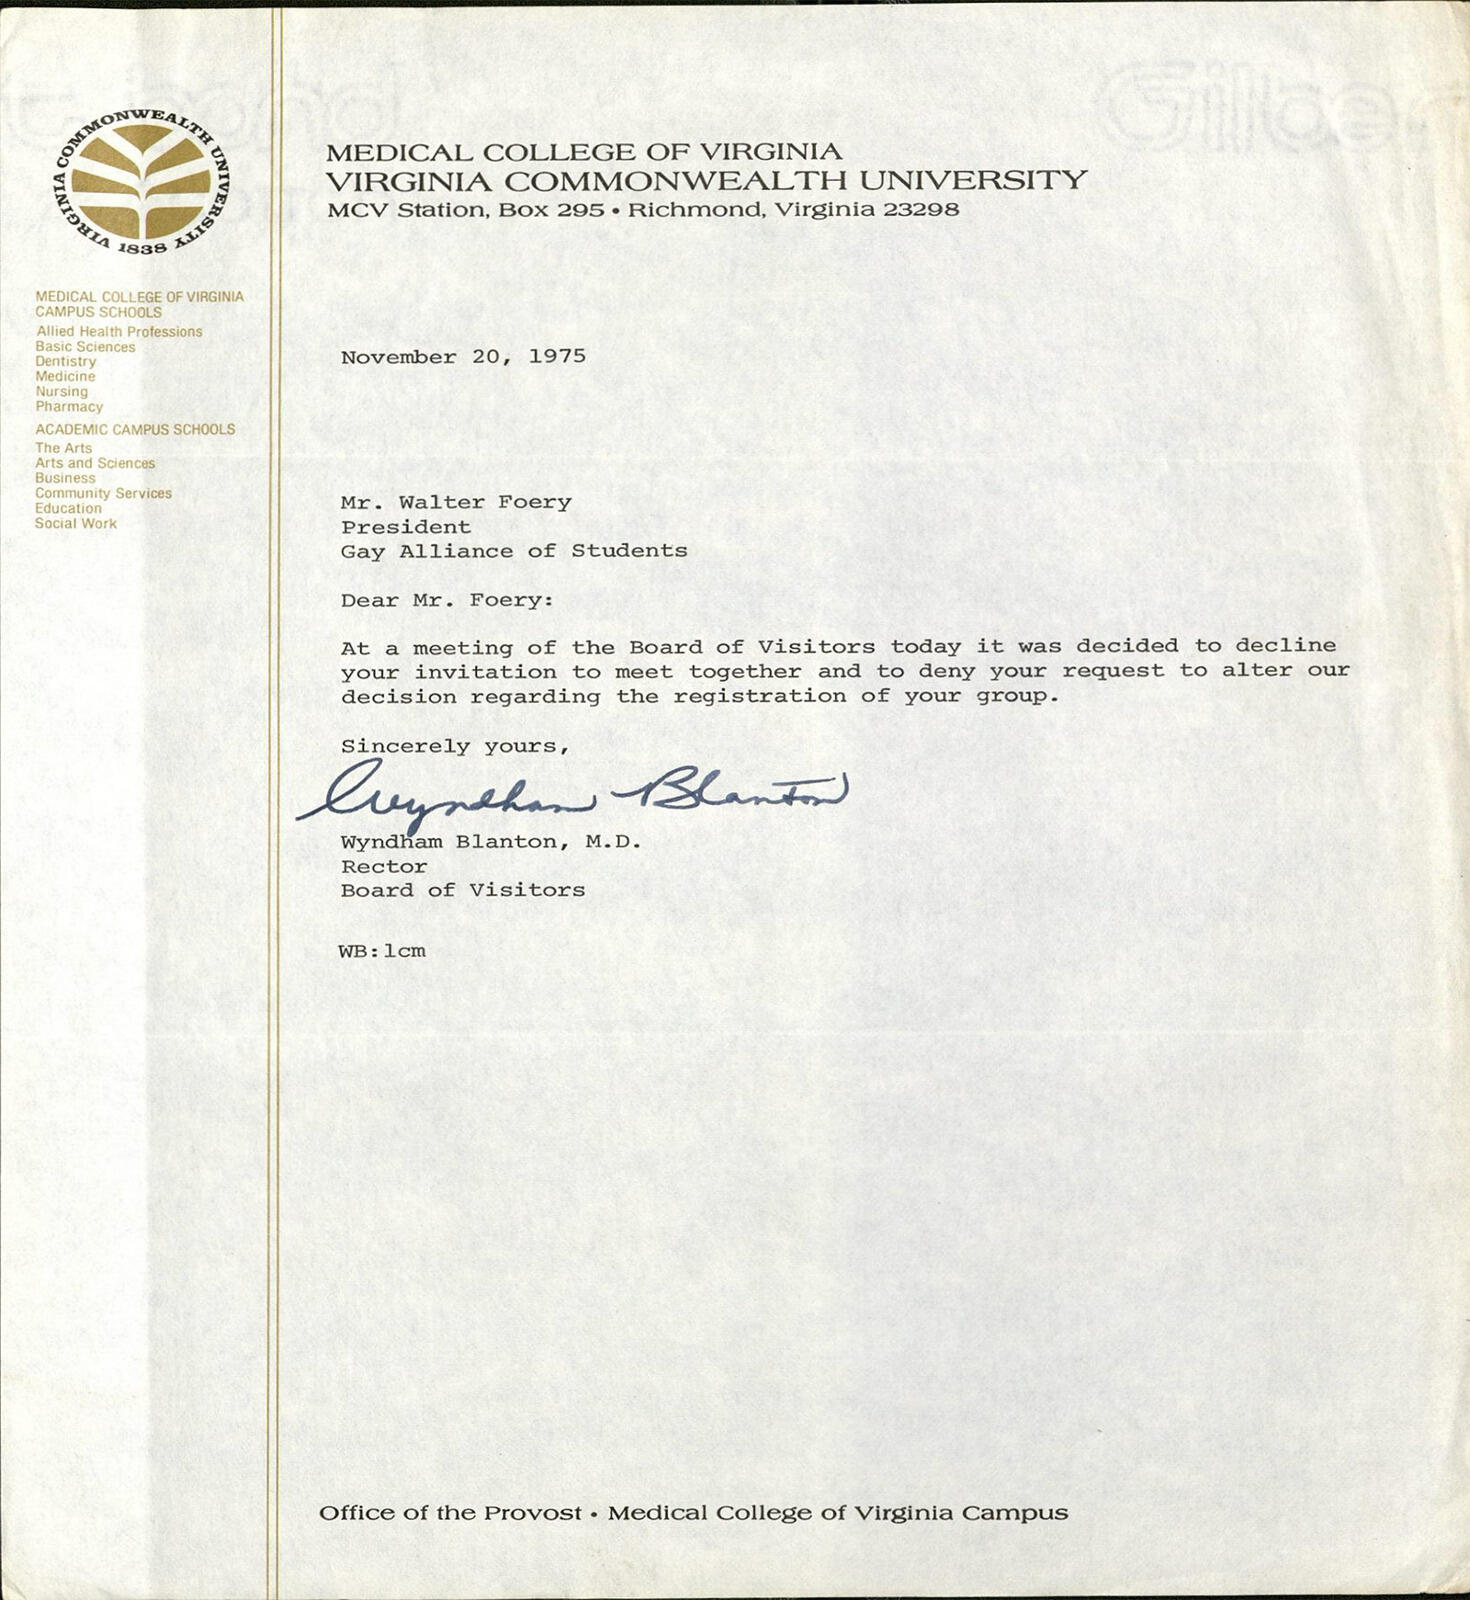 Correspondence between Walter Foery of the Gay Alliance of Students and Wyndham Blanton, M.D., rector, VCU Board of Visitors, Nov. 20, 1975.
<br>Source: The VCU Gay Alliance of Students Collection, 1974-1976, a collection in Special Collections and Archives, James Branch Cabell Library
